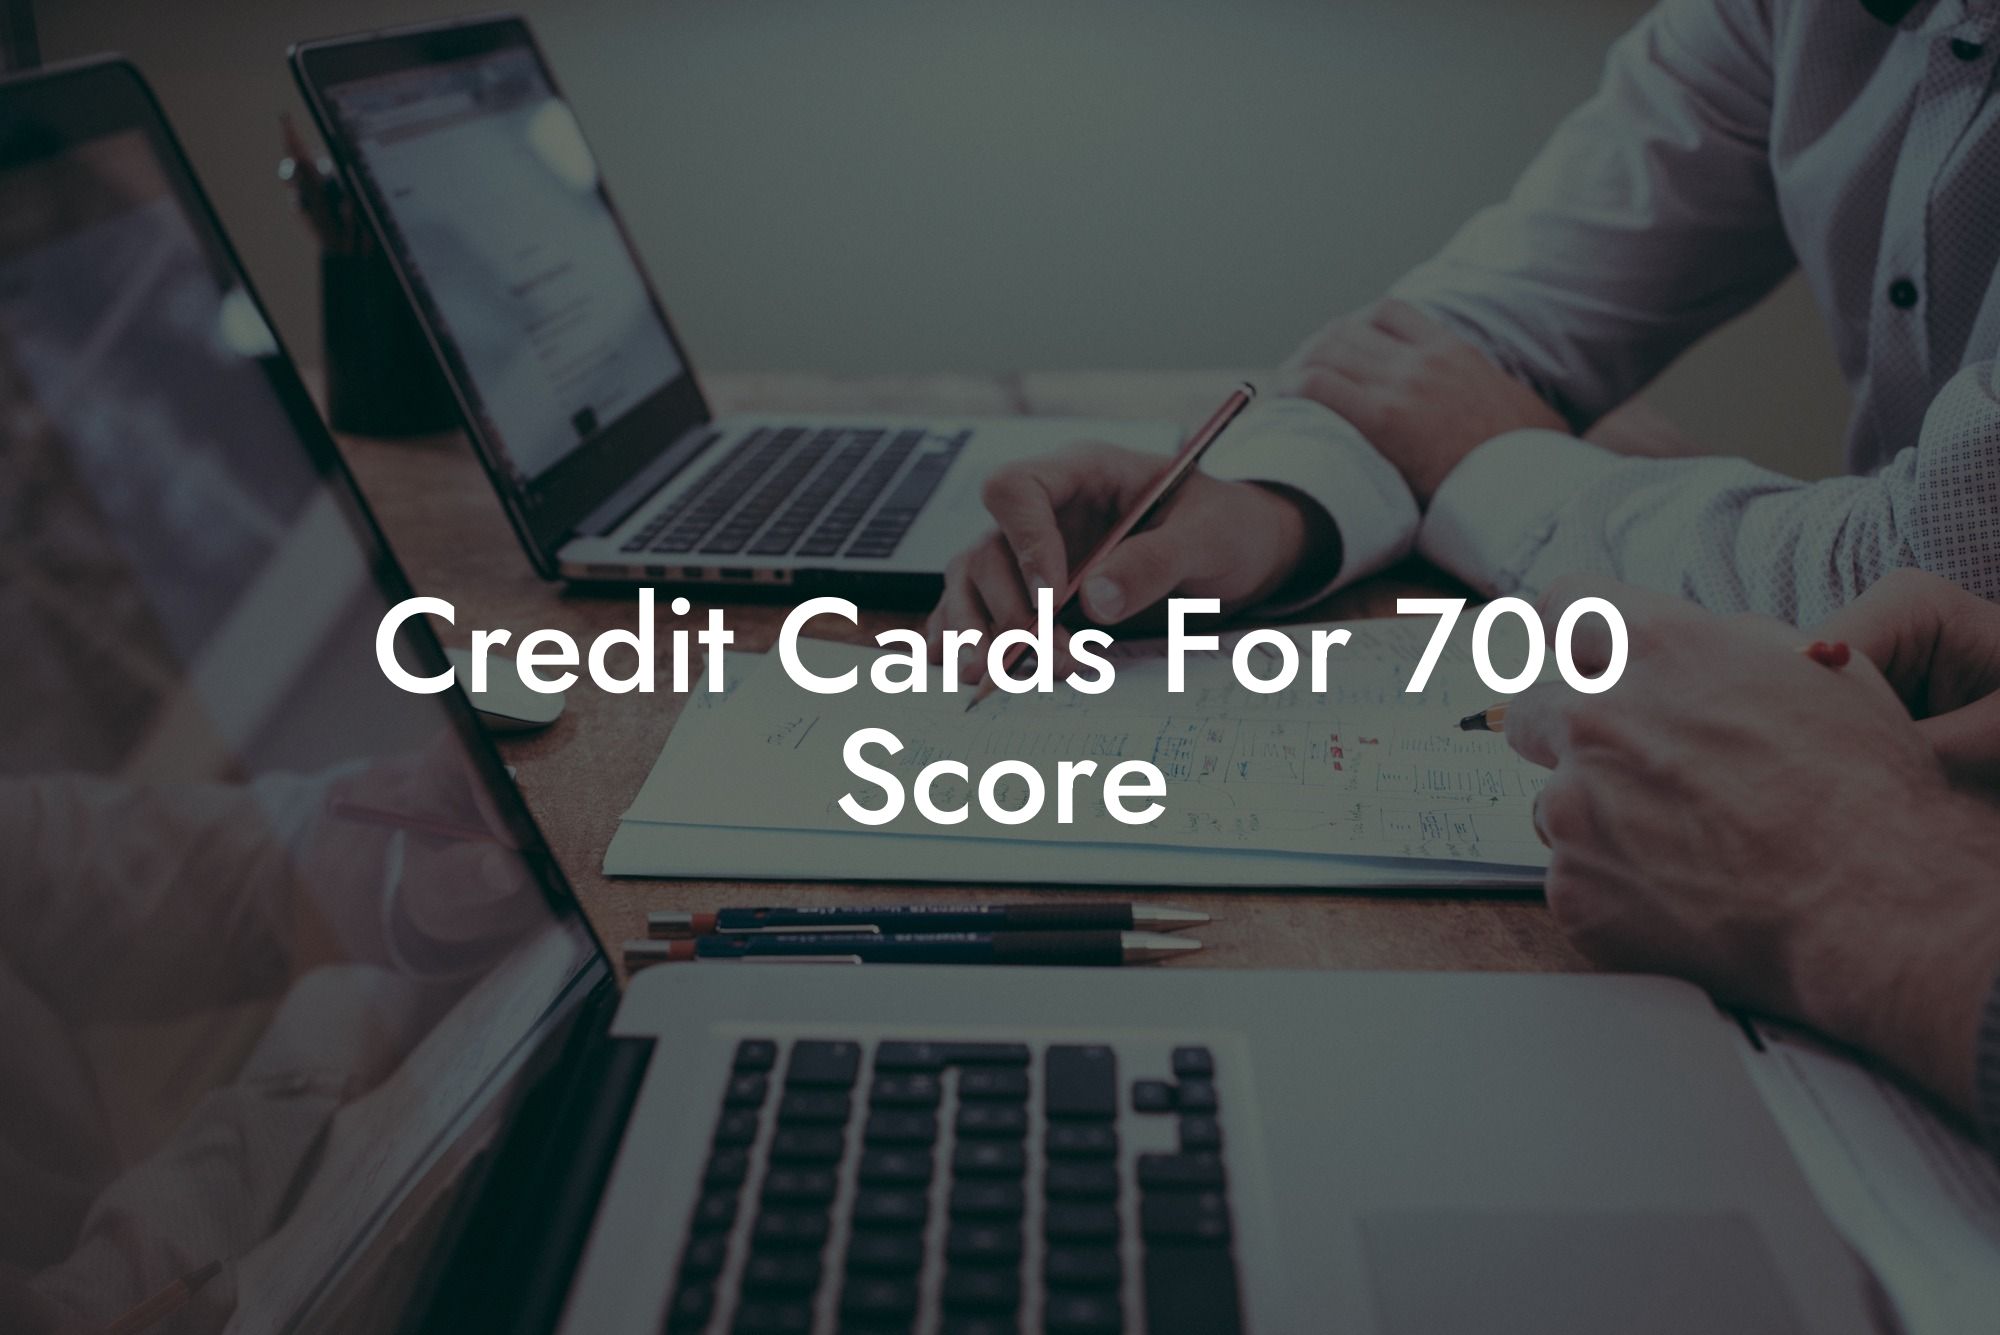 Credit Cards For 700 Score